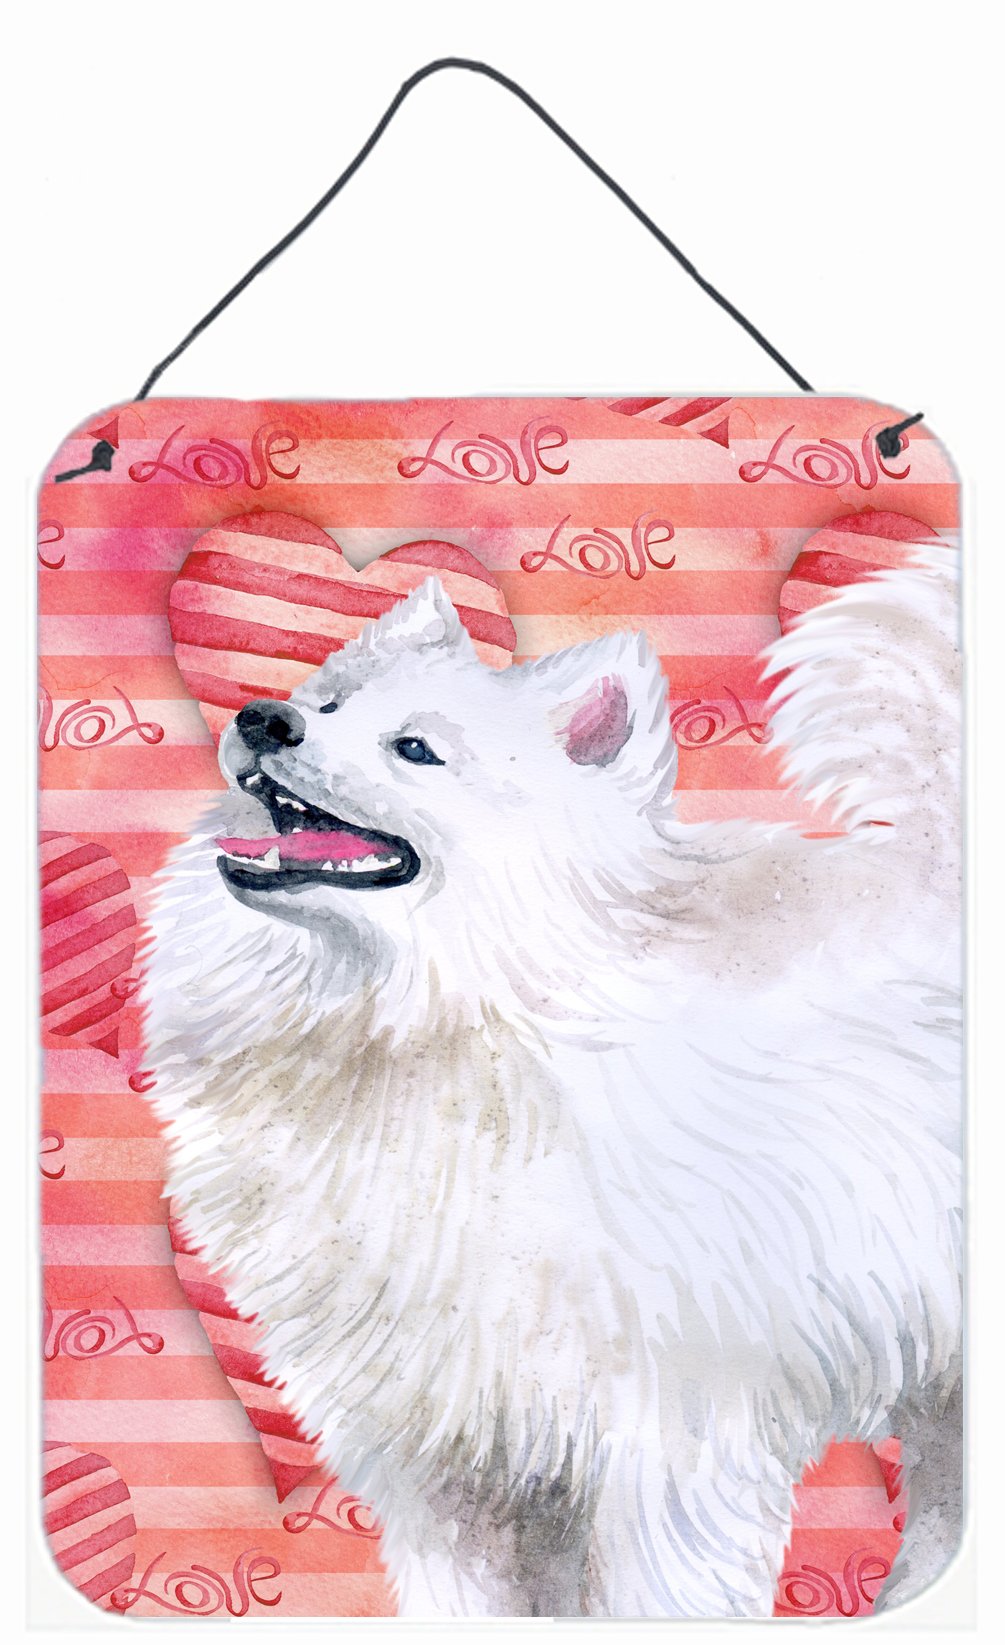 Samoyed Love Wall or Door Hanging Prints BB9778DS1216 by Caroline's Treasures